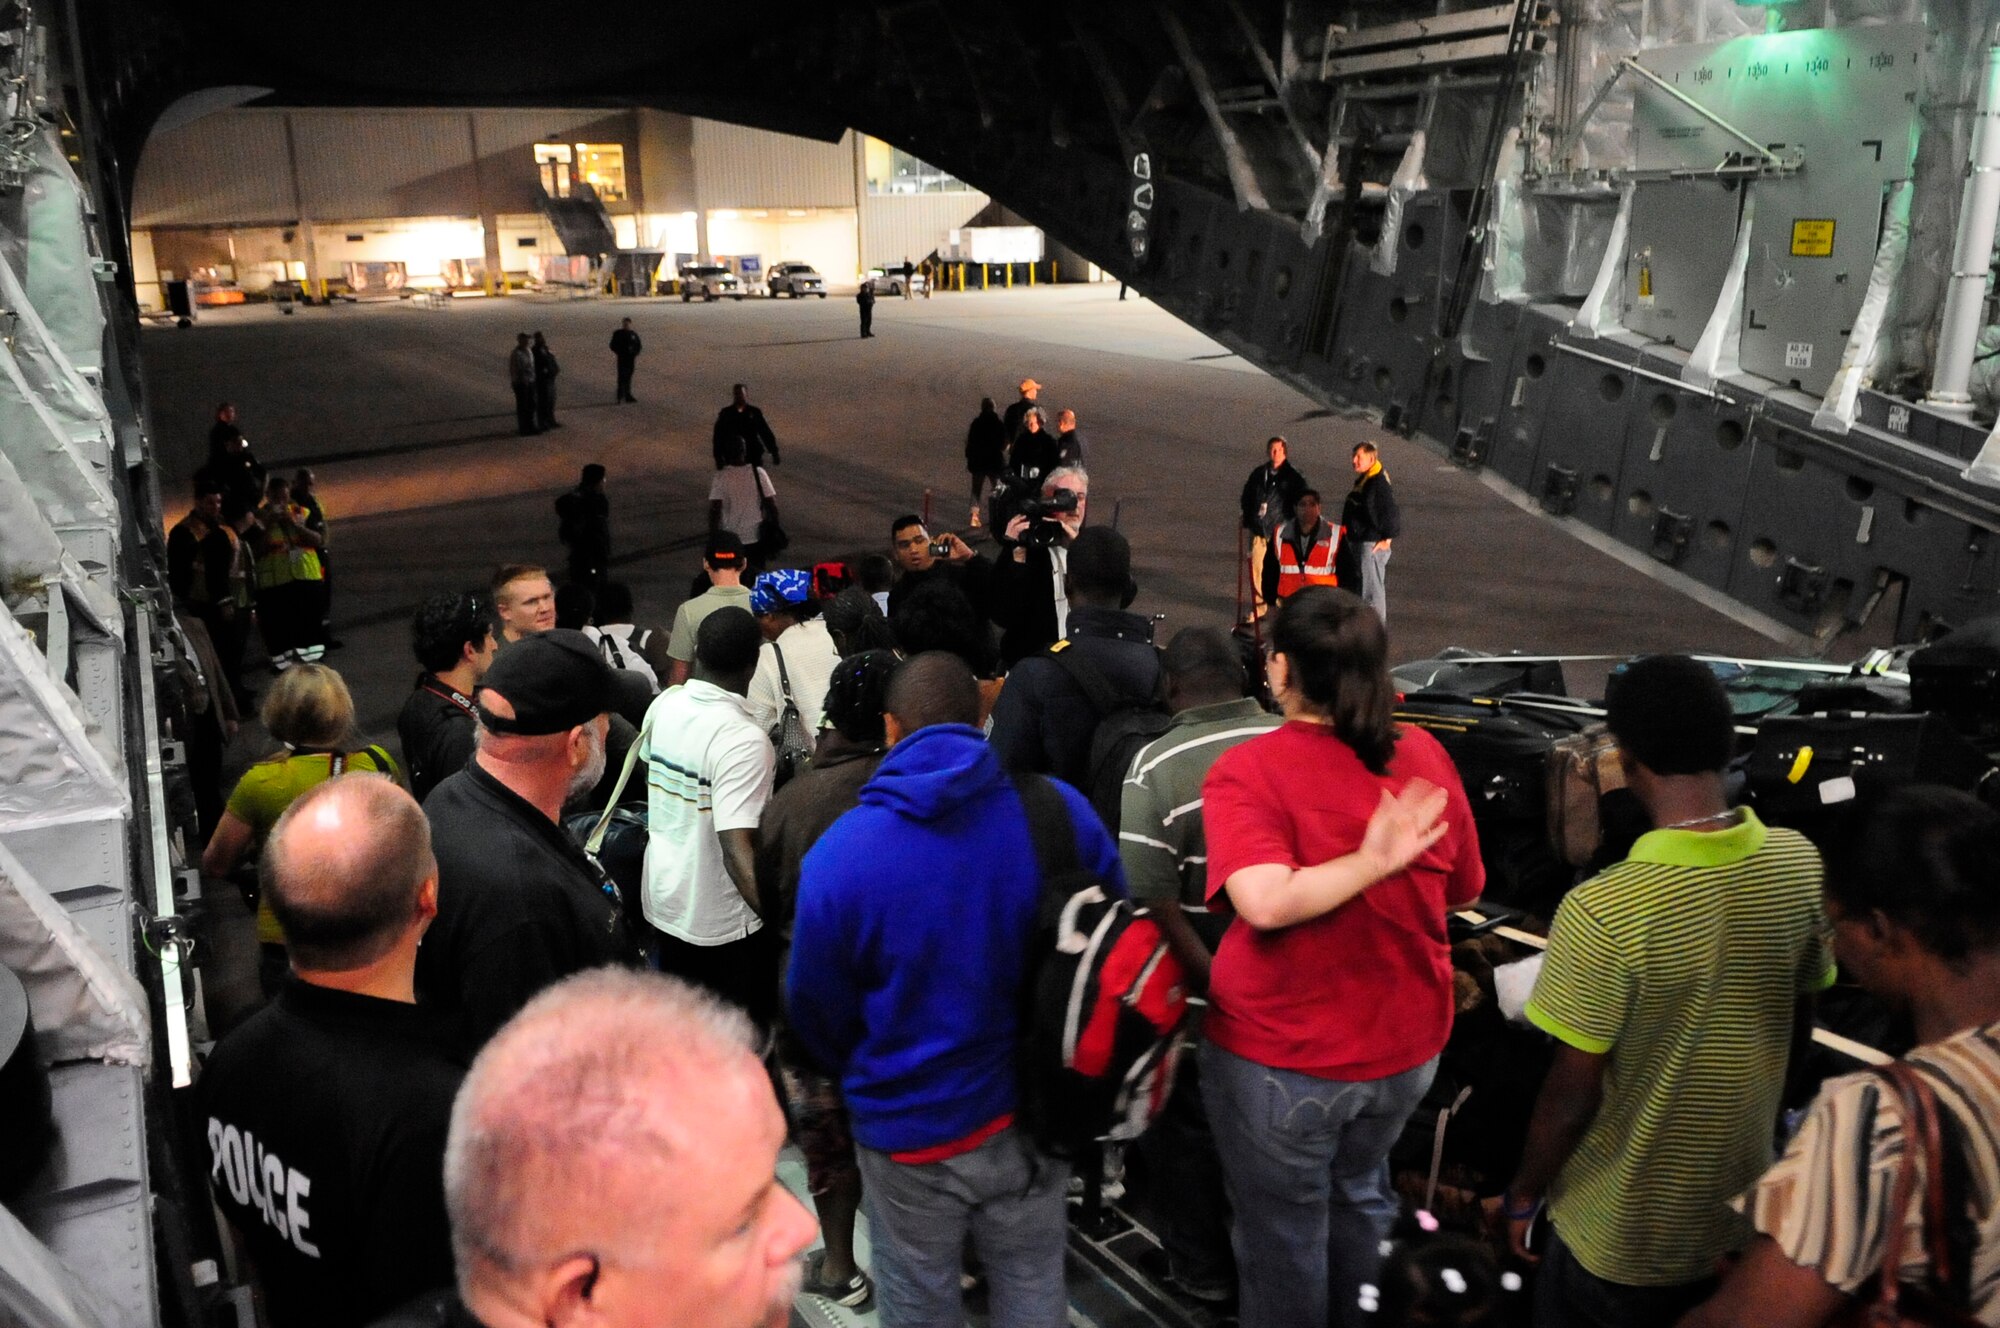 Evacuees exit a McChord C-17 at the Orlando International Airport in Orlando, Fla. Sunday.  The aircraft transported approximately 186 people from Port-Au-Prince’s Toussaint L’Ouventure International Airport, delivering them safely to Orlando. (U.S. AirForce photo/Master Sgt. Chris Haylett)